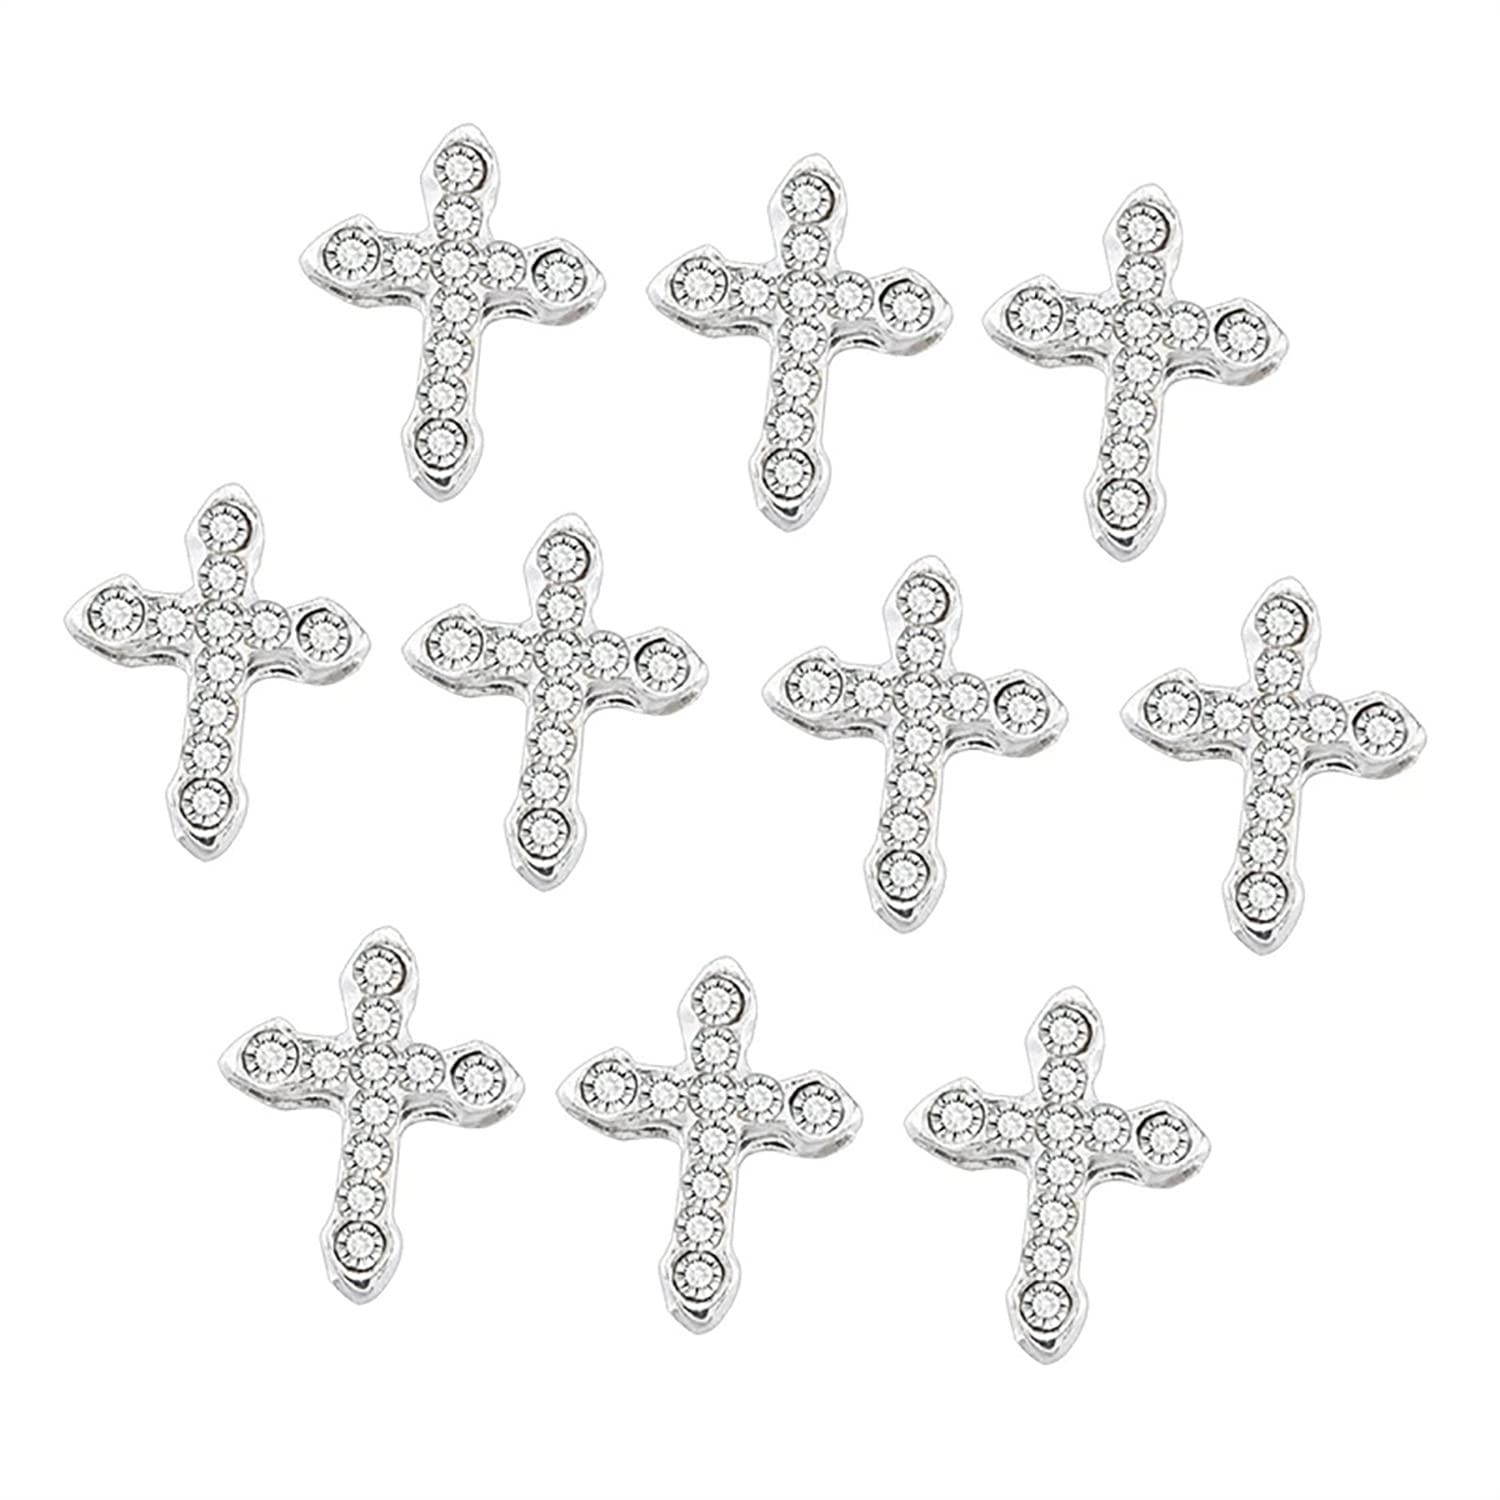 Alloy Cross Nail Charms Luxury Diamond Cross Charms for Nails